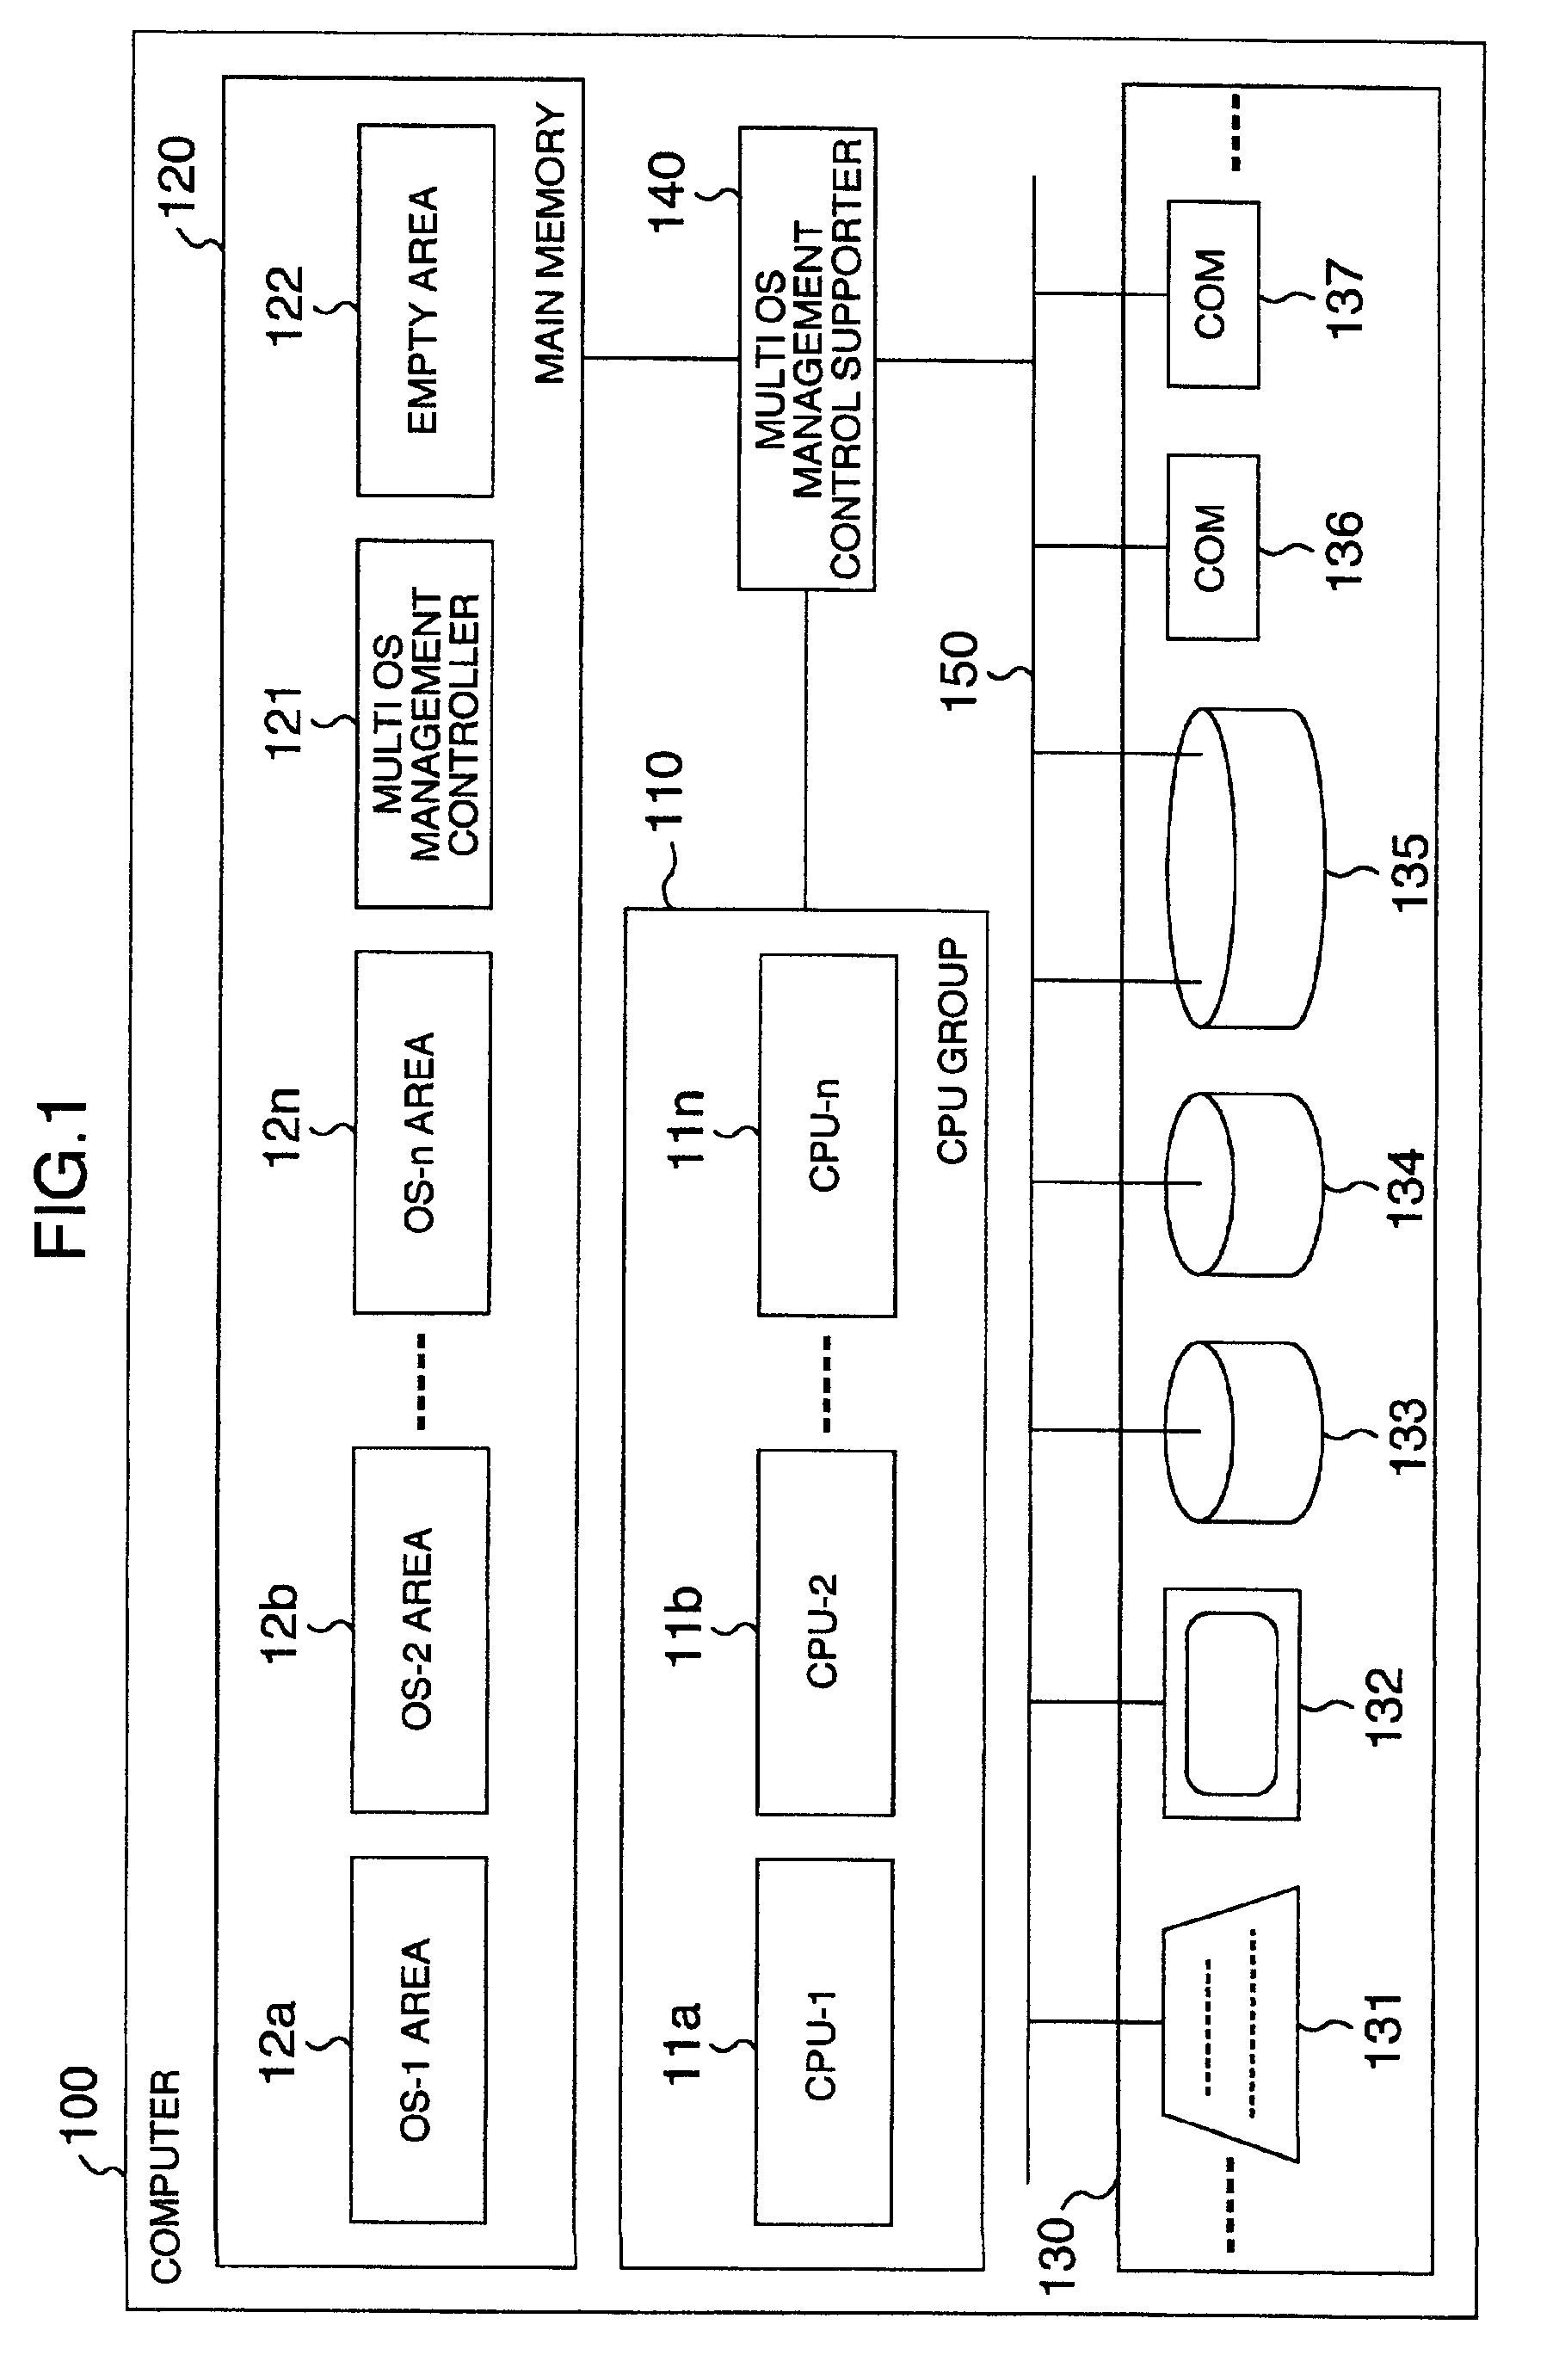 Computer system and a method for controlling a computer system